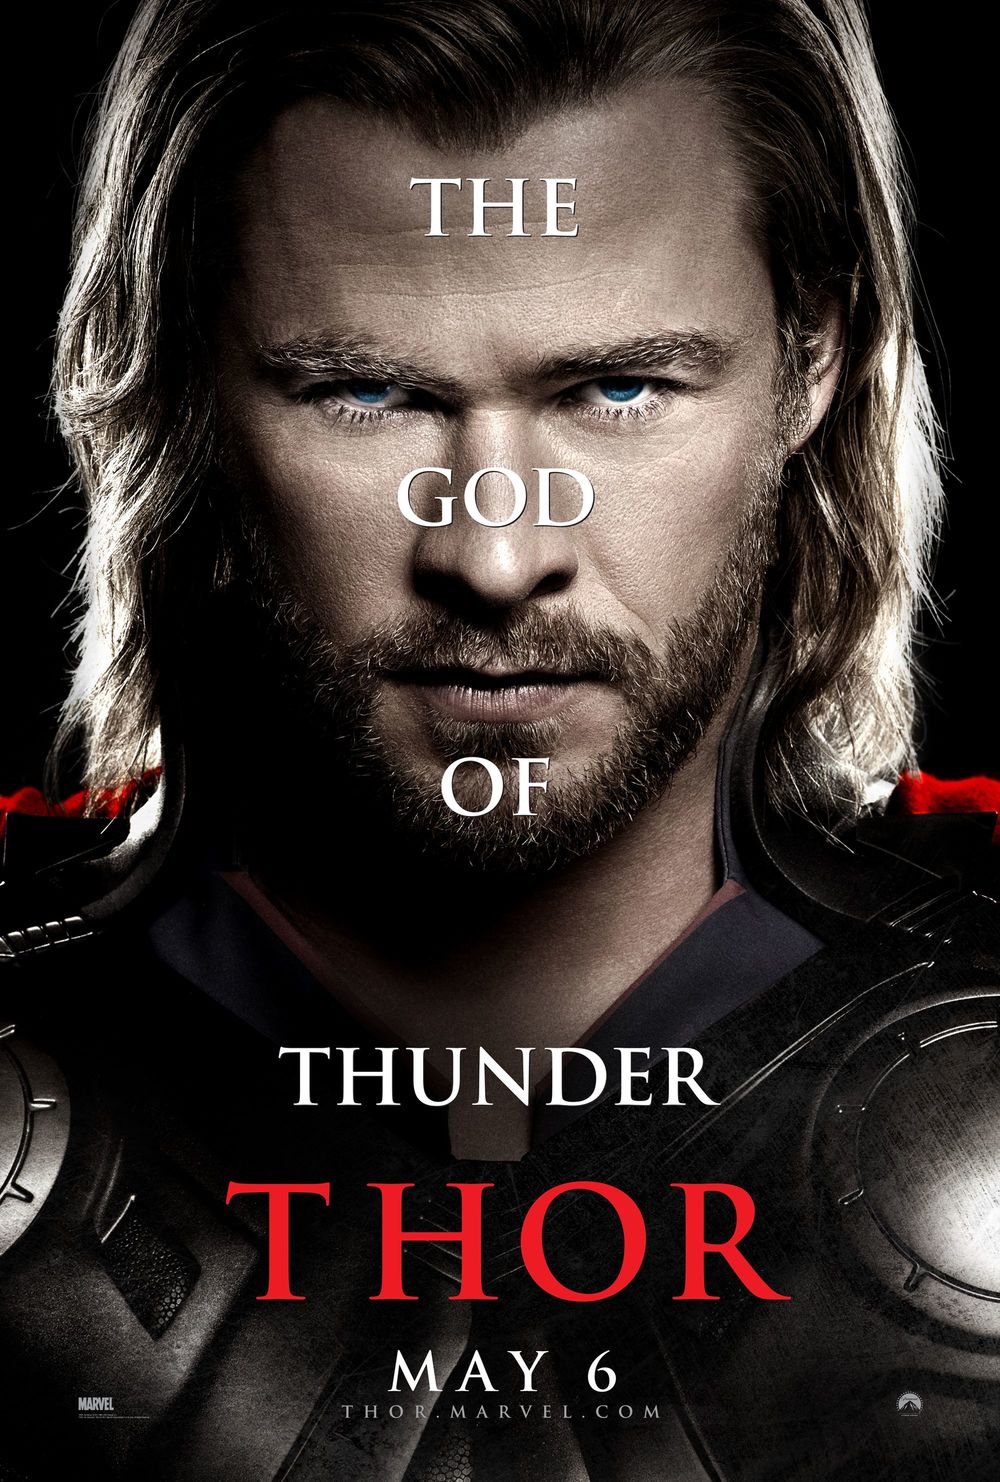 Thor Movies List in Order of Release Date | Comic Cons 2022 Dates